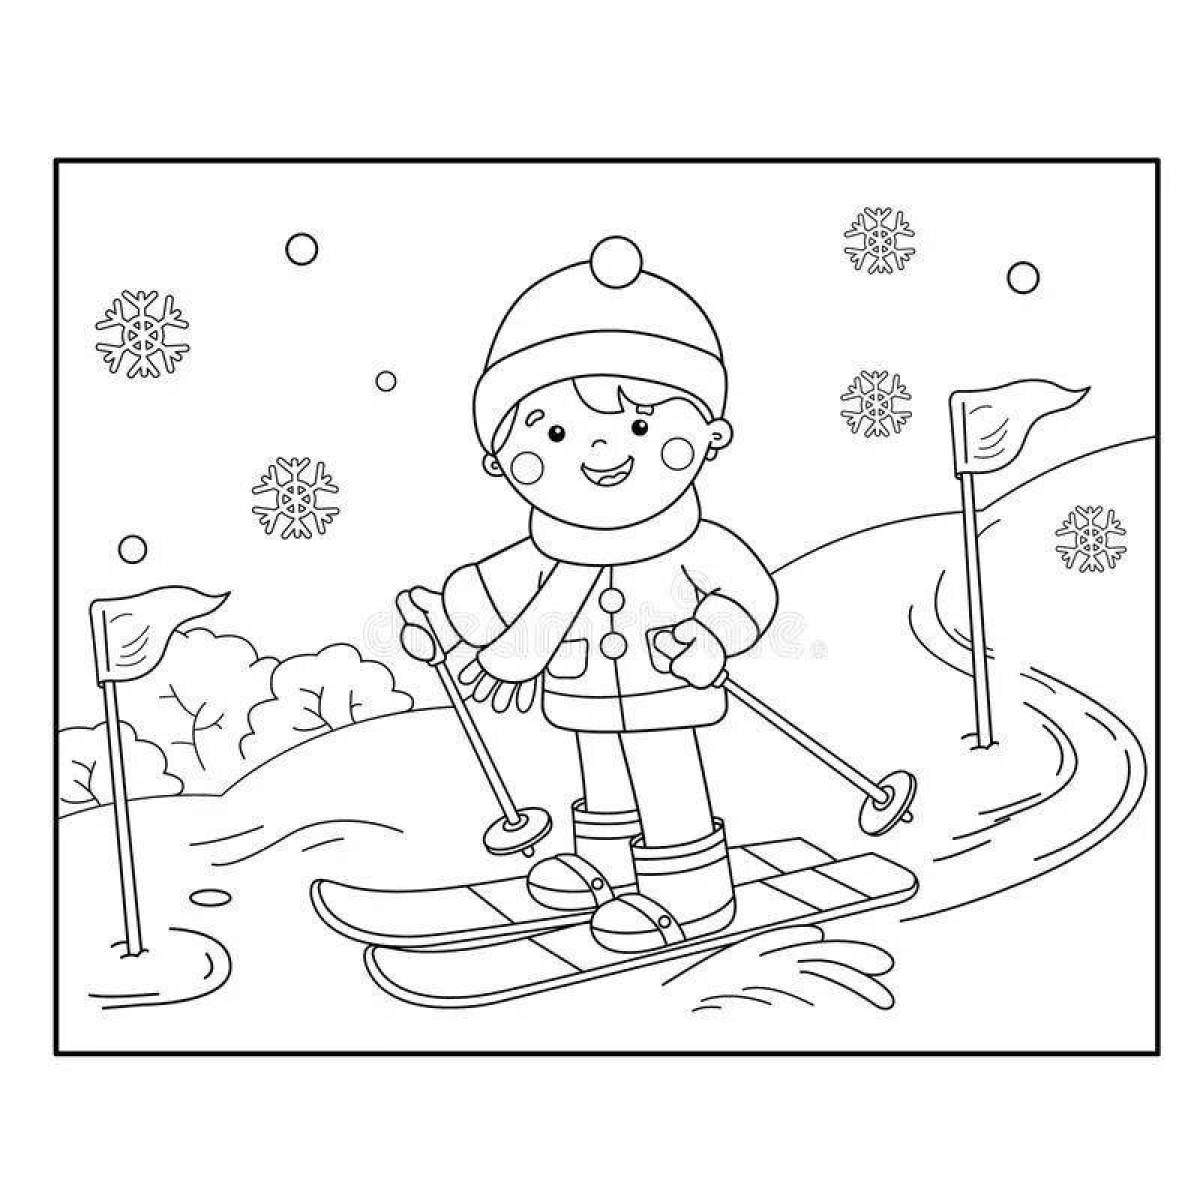 Glittering winter sports coloring page for 4-5 year olds